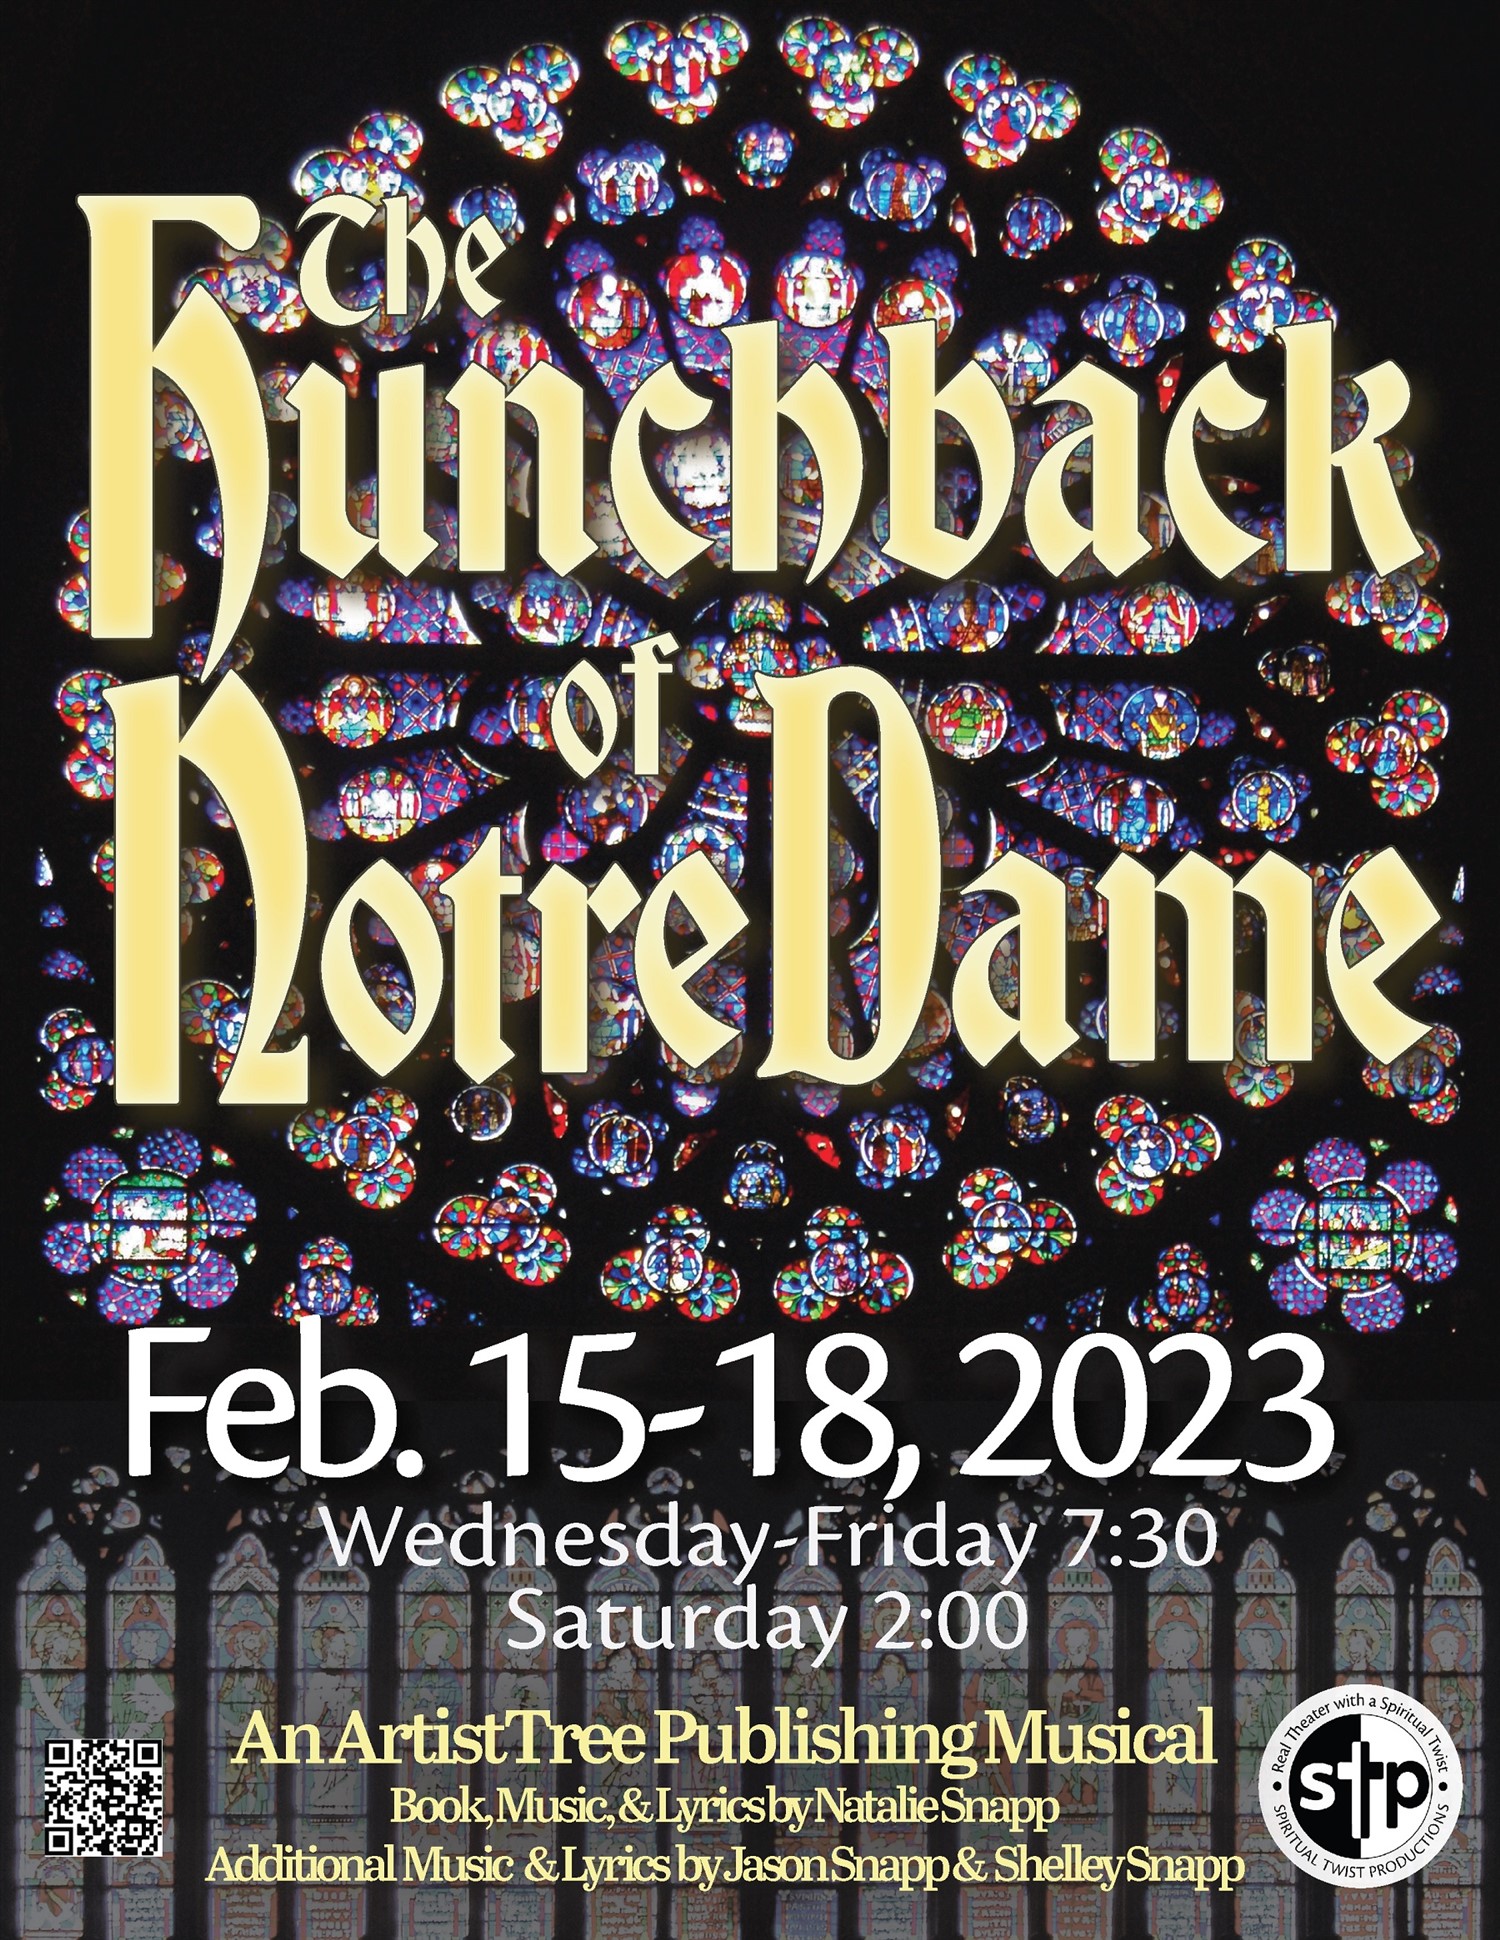 The Hunchback of Notre Dame Thursday, February 16, 2023 @ 7:30 PM on Feb 16, 19:30@Spiritual Twist Productions - Pick a seat, Buy tickets and Get information on Spiritual Twist Productions tickets.spiritualtwist.com